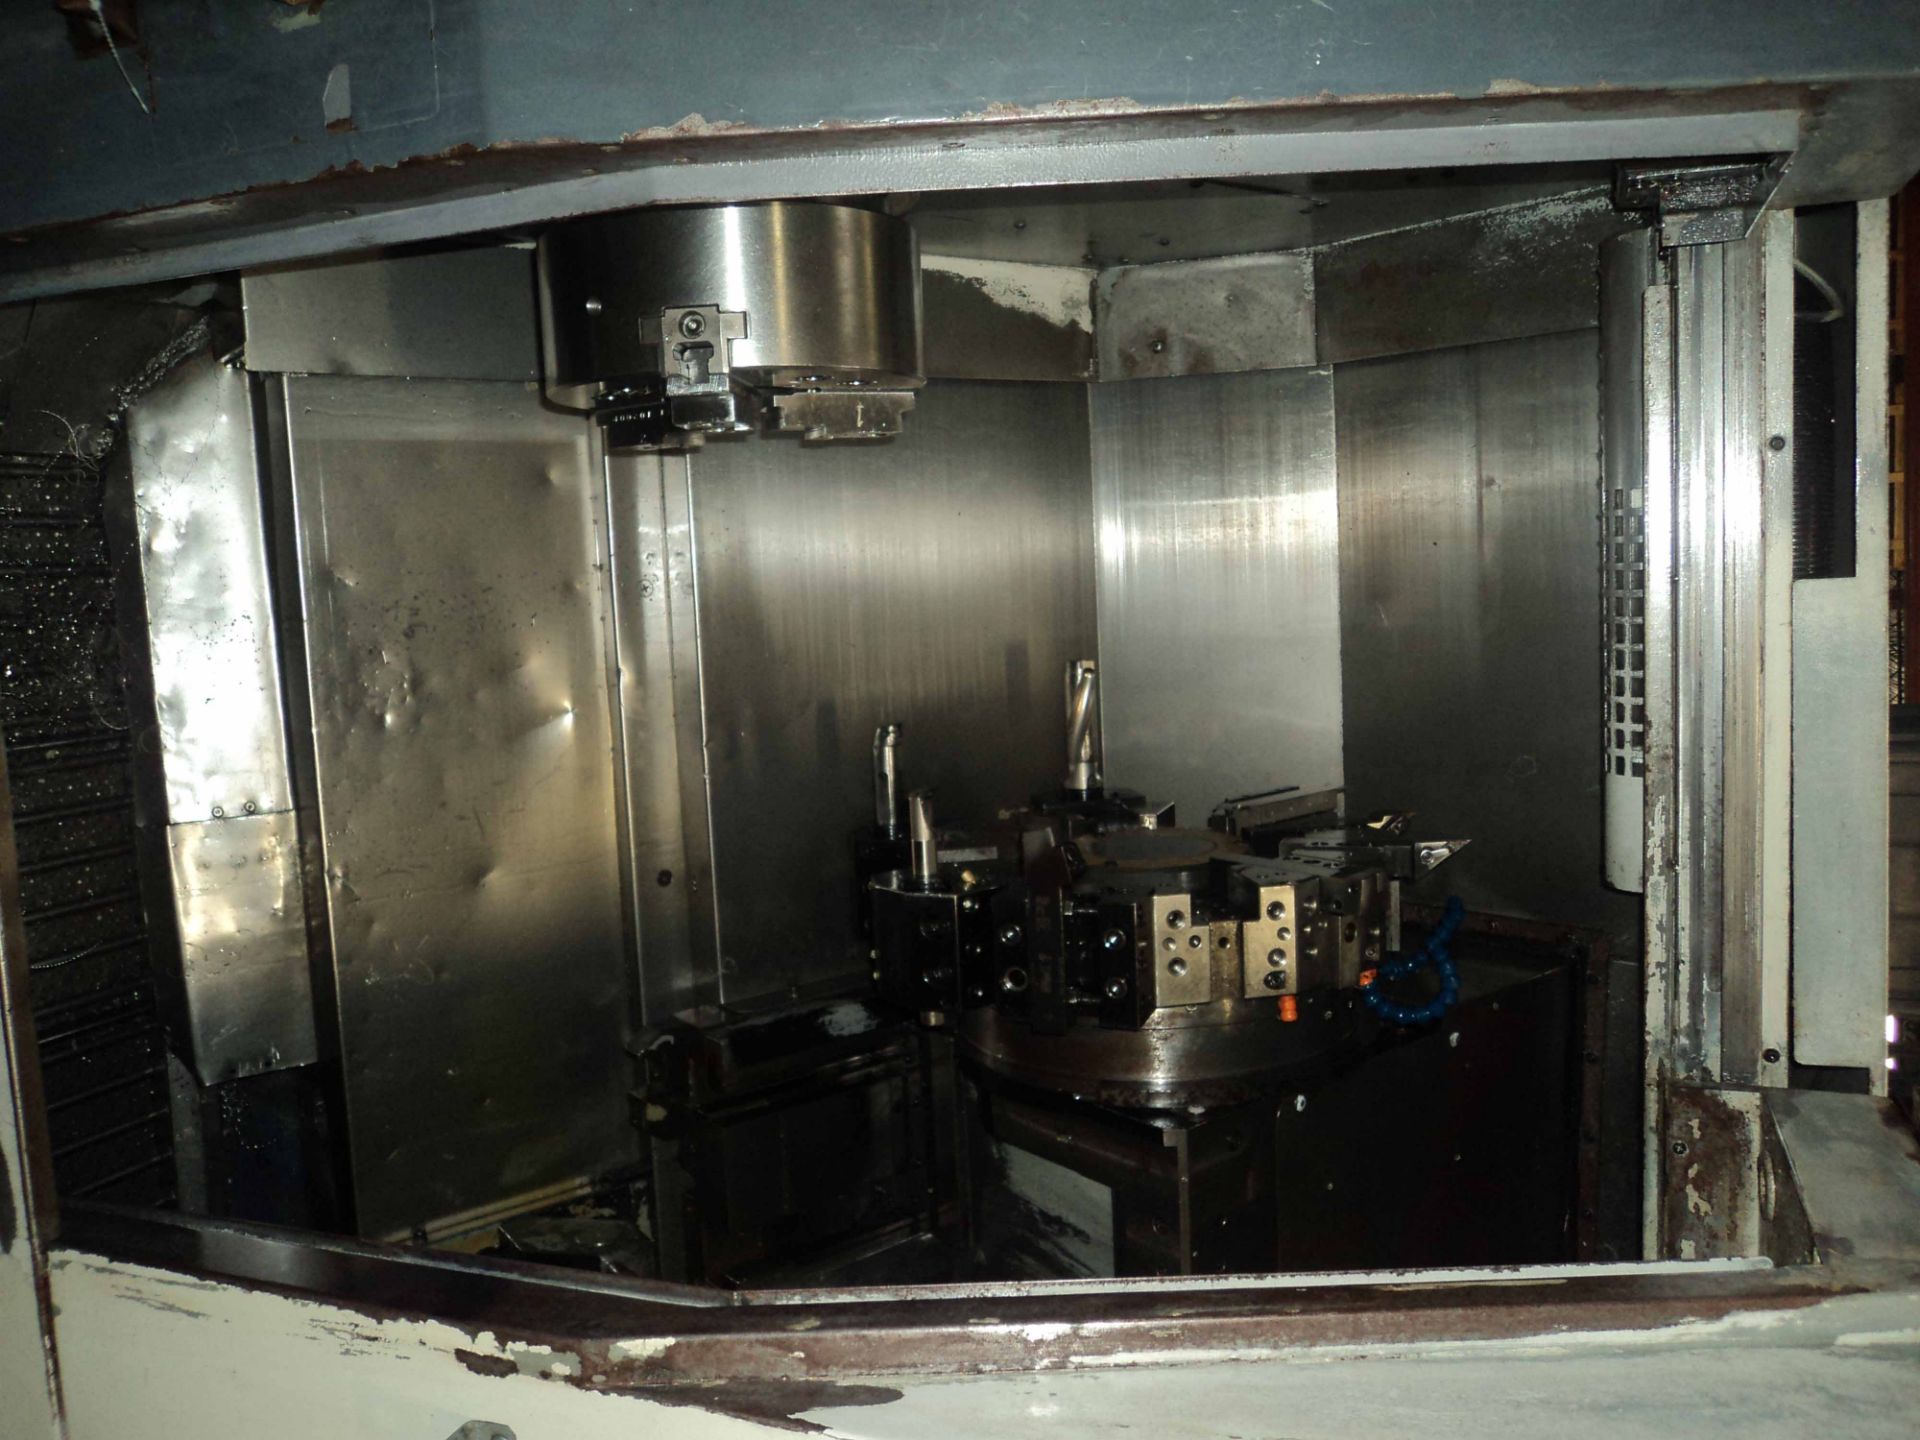 CNC LATHE, MORI SEIKI MDL. SL-200, MSC-500 CNC control, 25.8" sw. over bed, 20.1" sw. over - Image 2 of 5